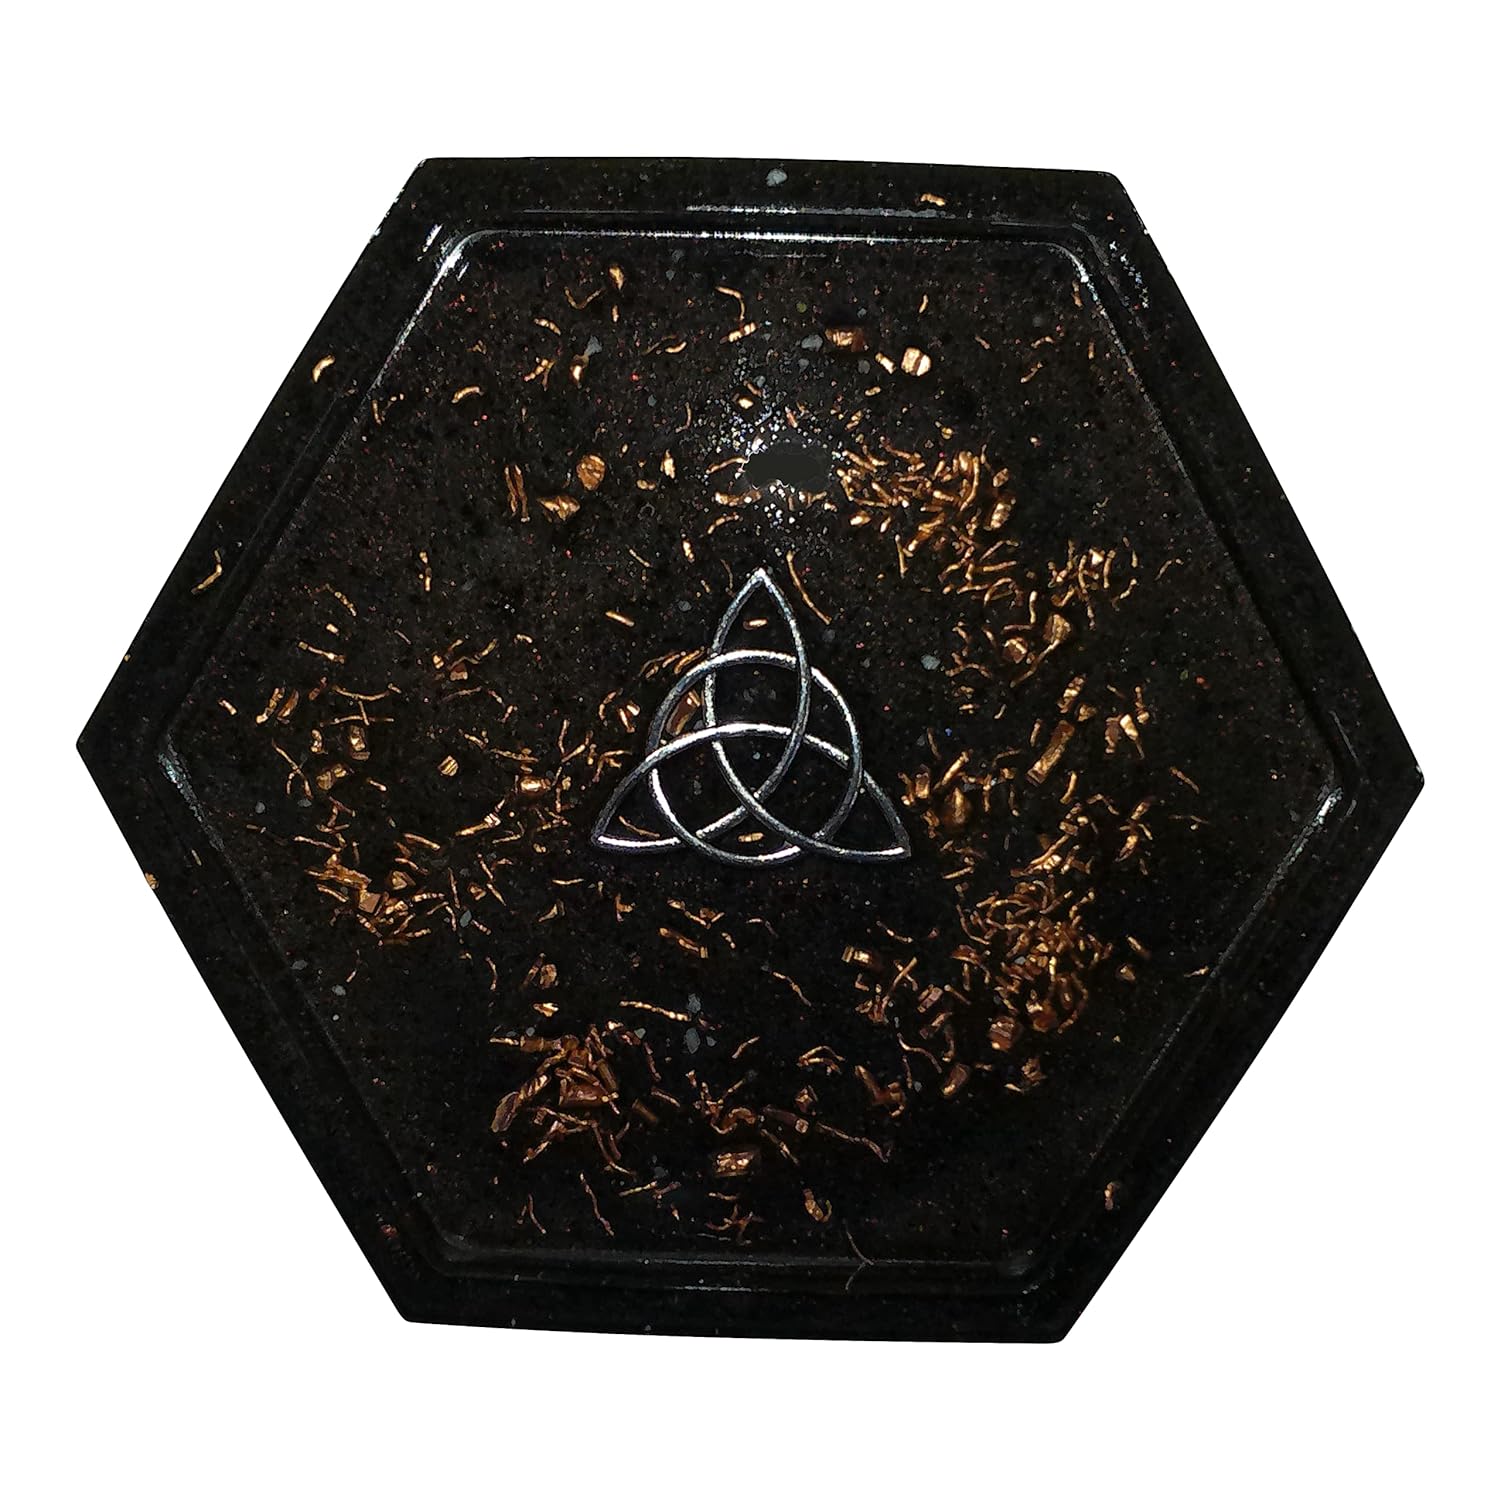 Water Charging Plate - Geometric Charging Plate With Shungite, Copper ...